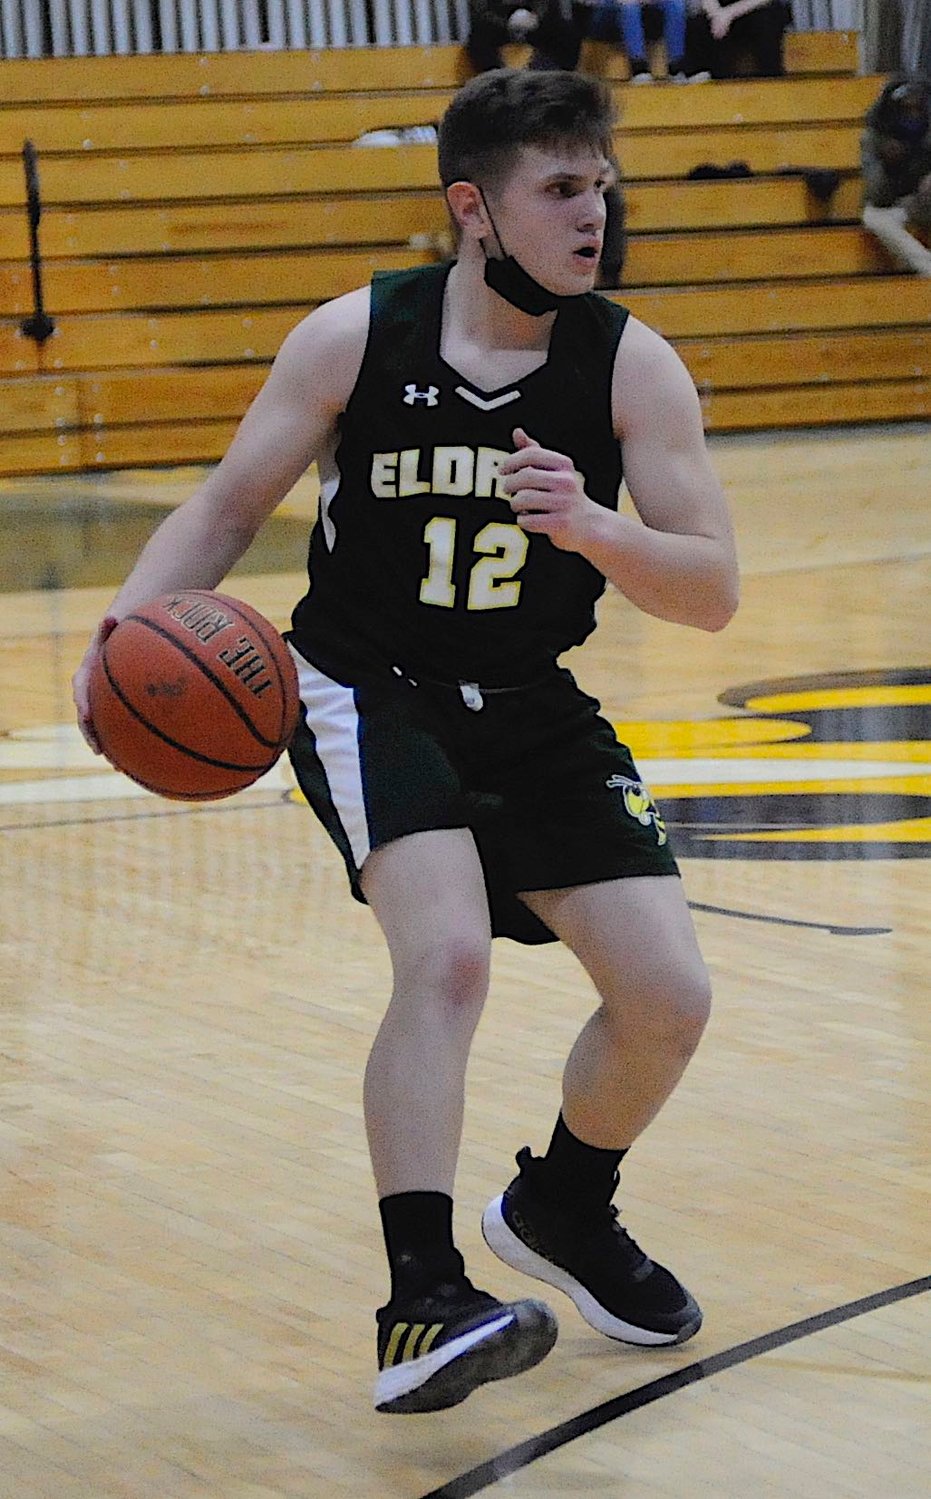 Team leader. Eldred’s Matthew Ranaudo led the Yellowjackets with 8 points.